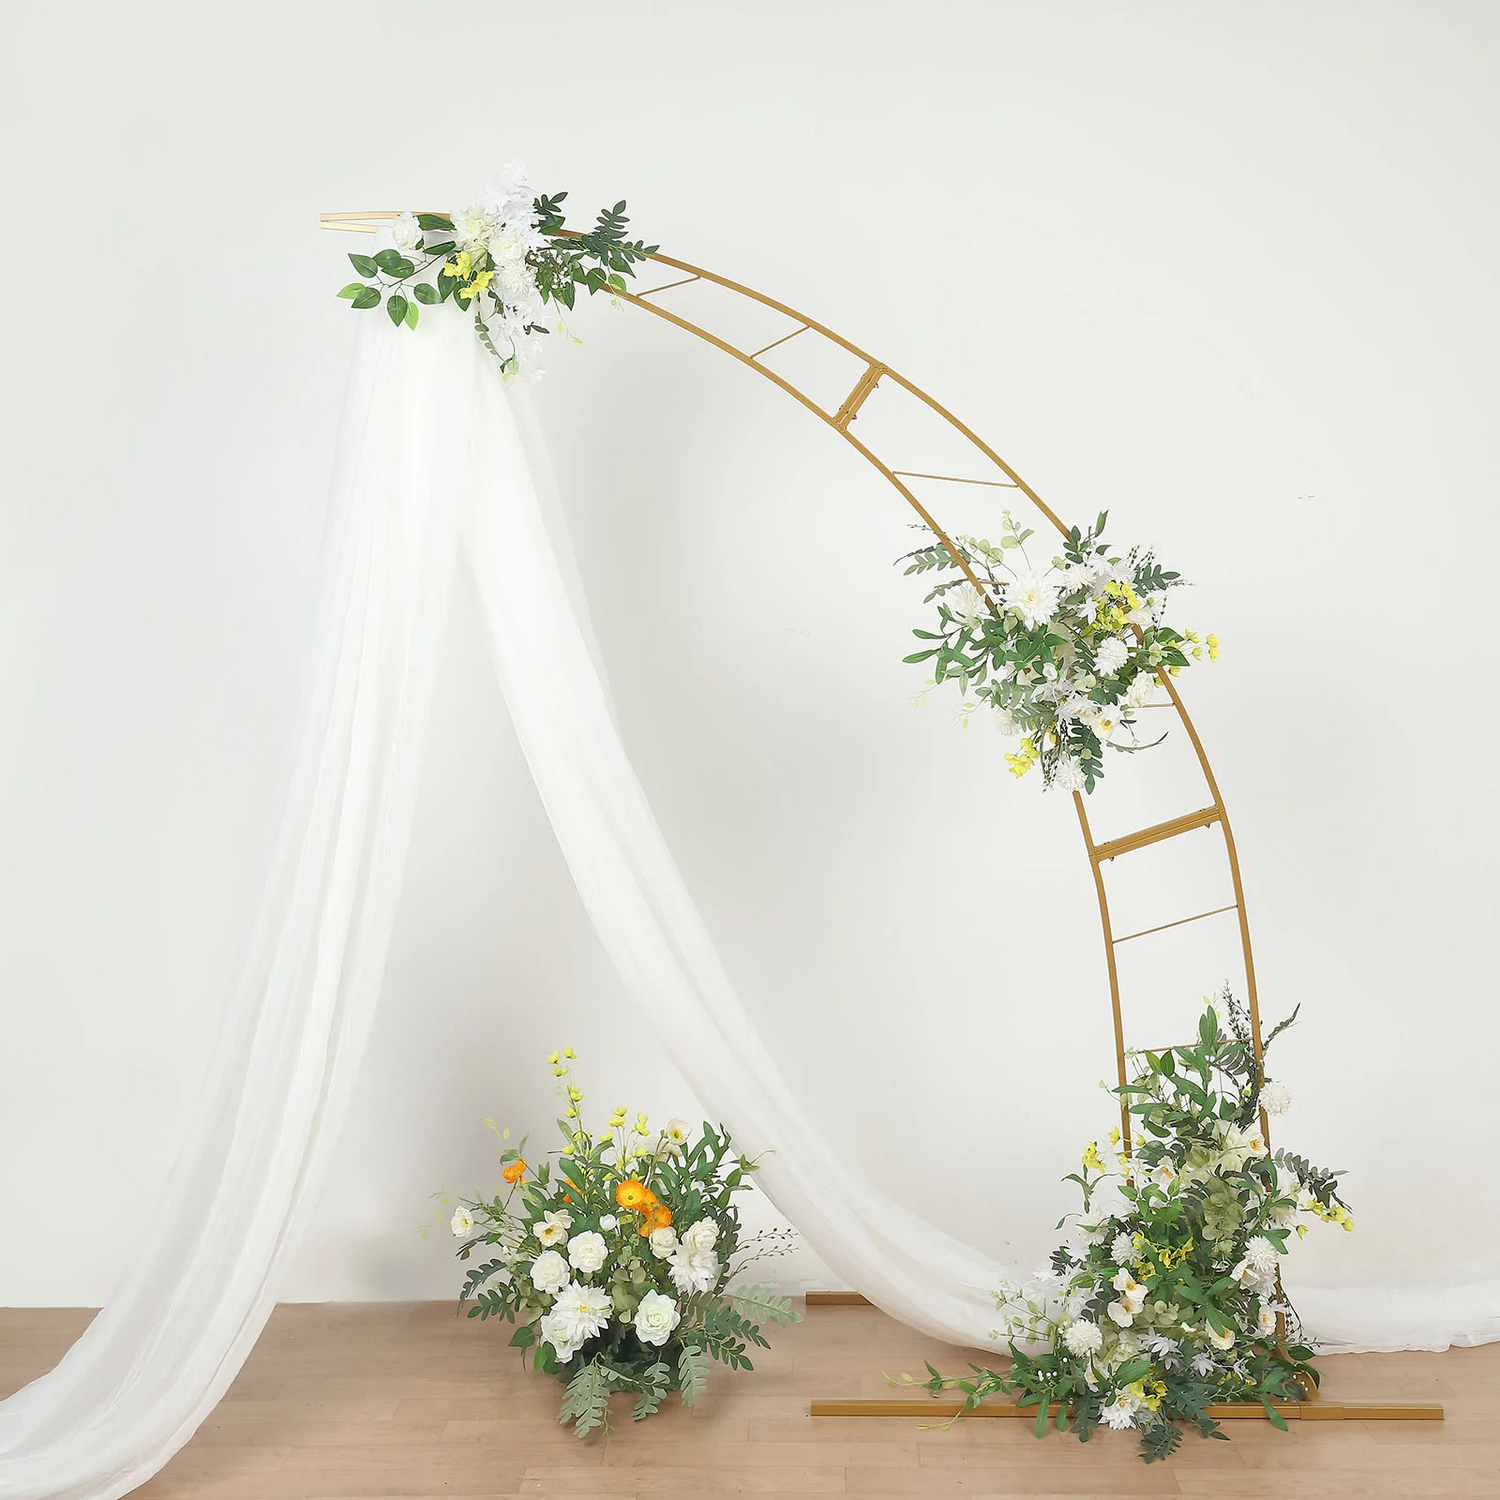 This Metal Half Moon Wedding Arch Planter is the perfect addition to any wedding. It is made of high-quality metal, which is very durable. The arch is made of a half-moon structure with a trellis on top. The flower stand can be decorated with fresh flowers to create a beautiful backdrop. This arch is the perfect addition to any wedding and is sure to impress your guests.